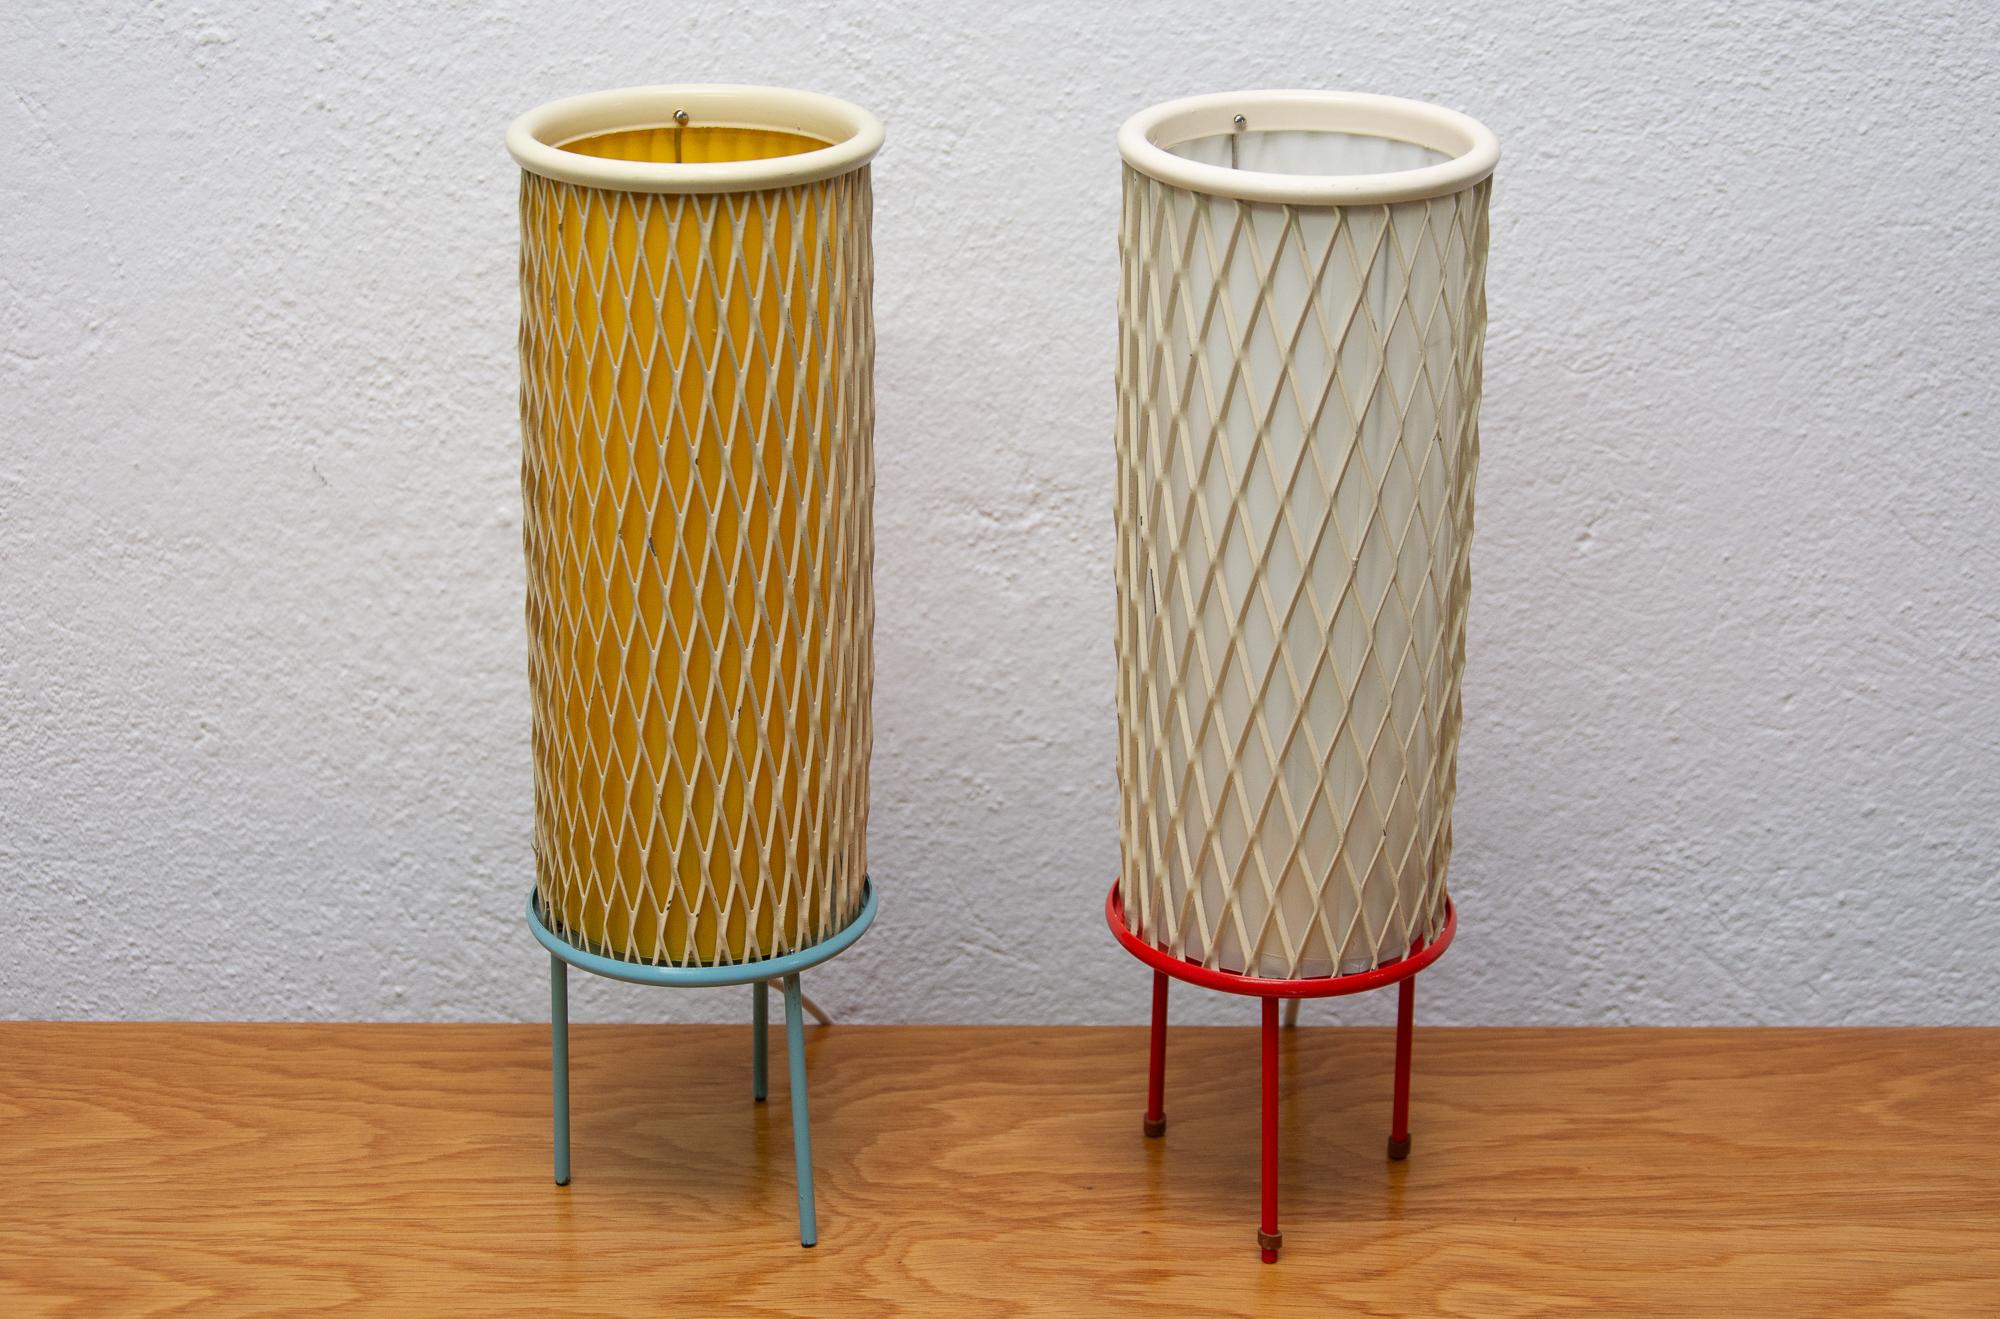 Metal Pair of Midcentury Rocket Table Lamps by Josef Hůrka for Napako, 1960s, Czech